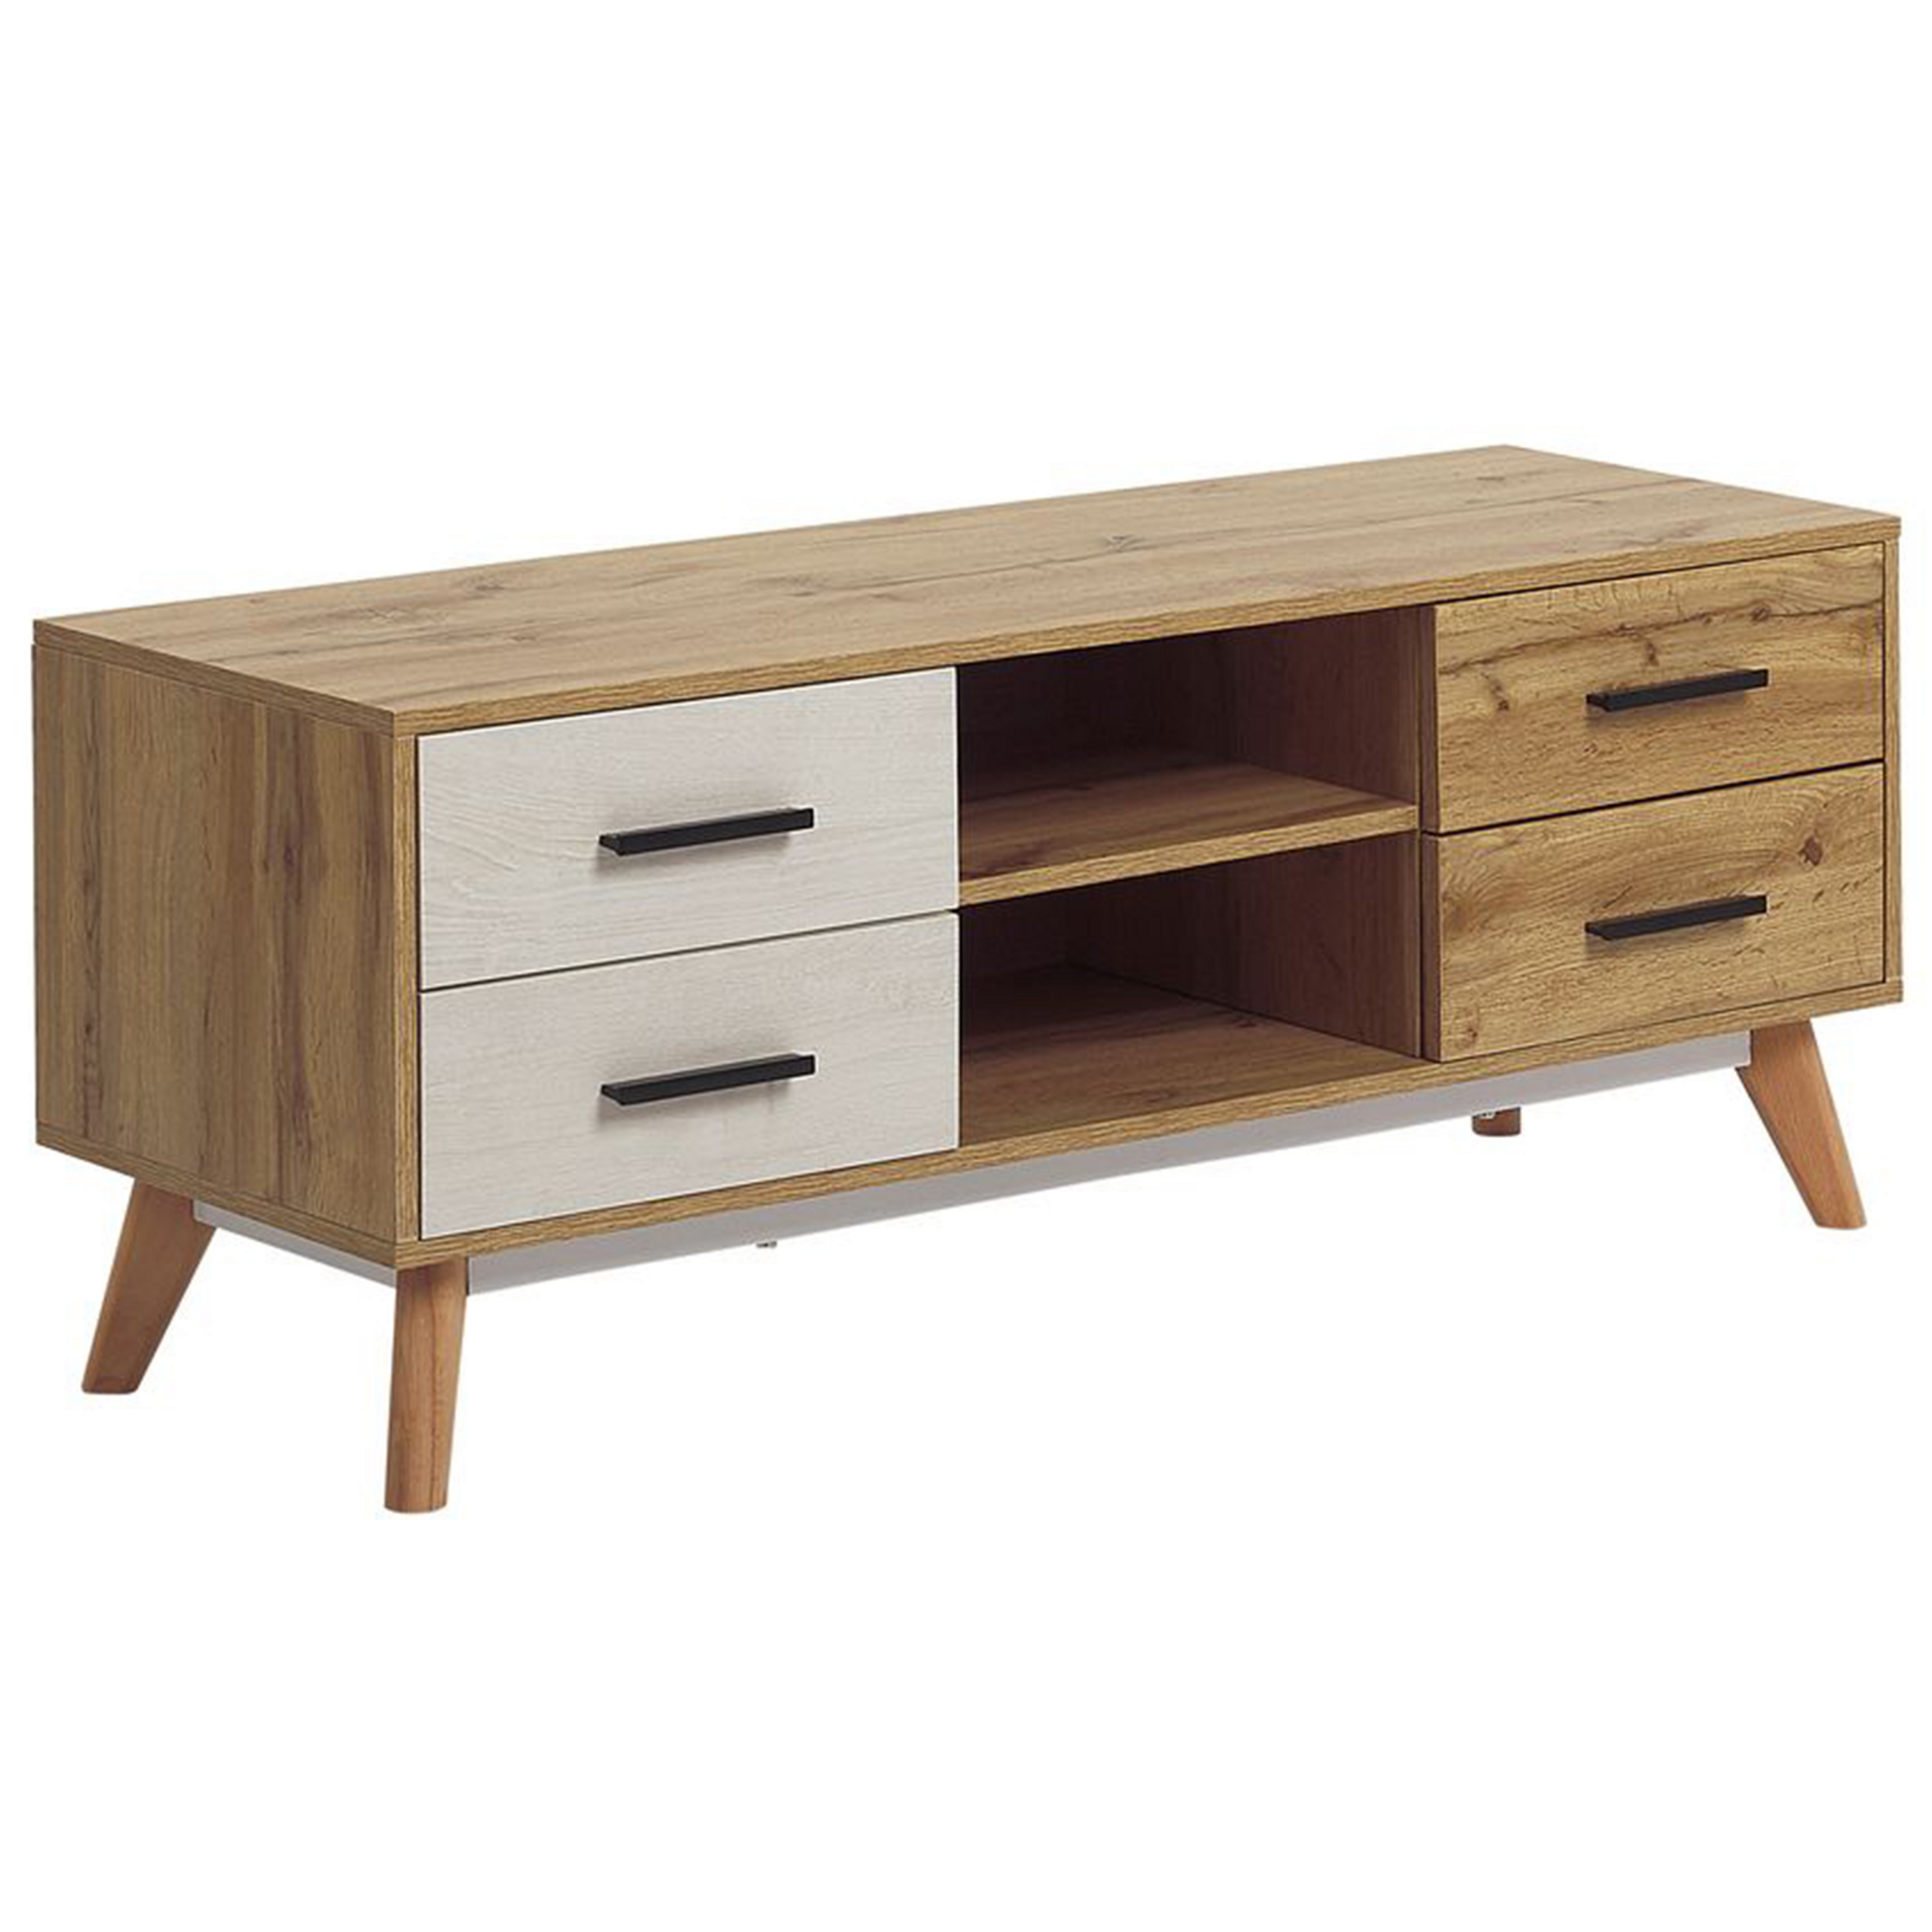 Beliani TV Stand Light Wood with White for up to 55ʺ TV with 4 Drawers and 2 Shelves Rustic